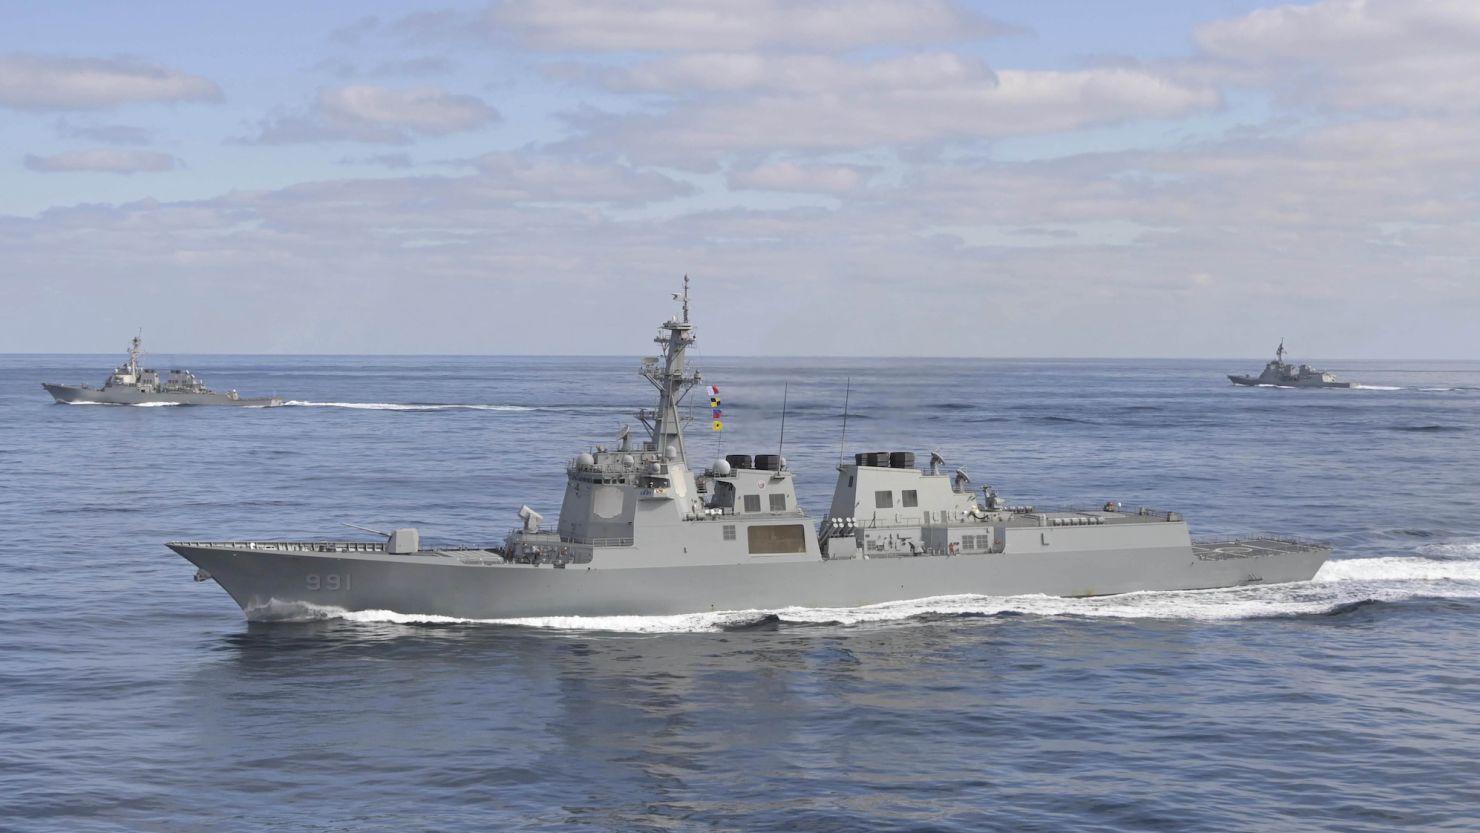 The South Korean Navy's Aegis destroyer King Sejong the Great, front, sails with US and Japanese ships during a joint drill off the east coast of the Korean peninsula on Feb. 22.